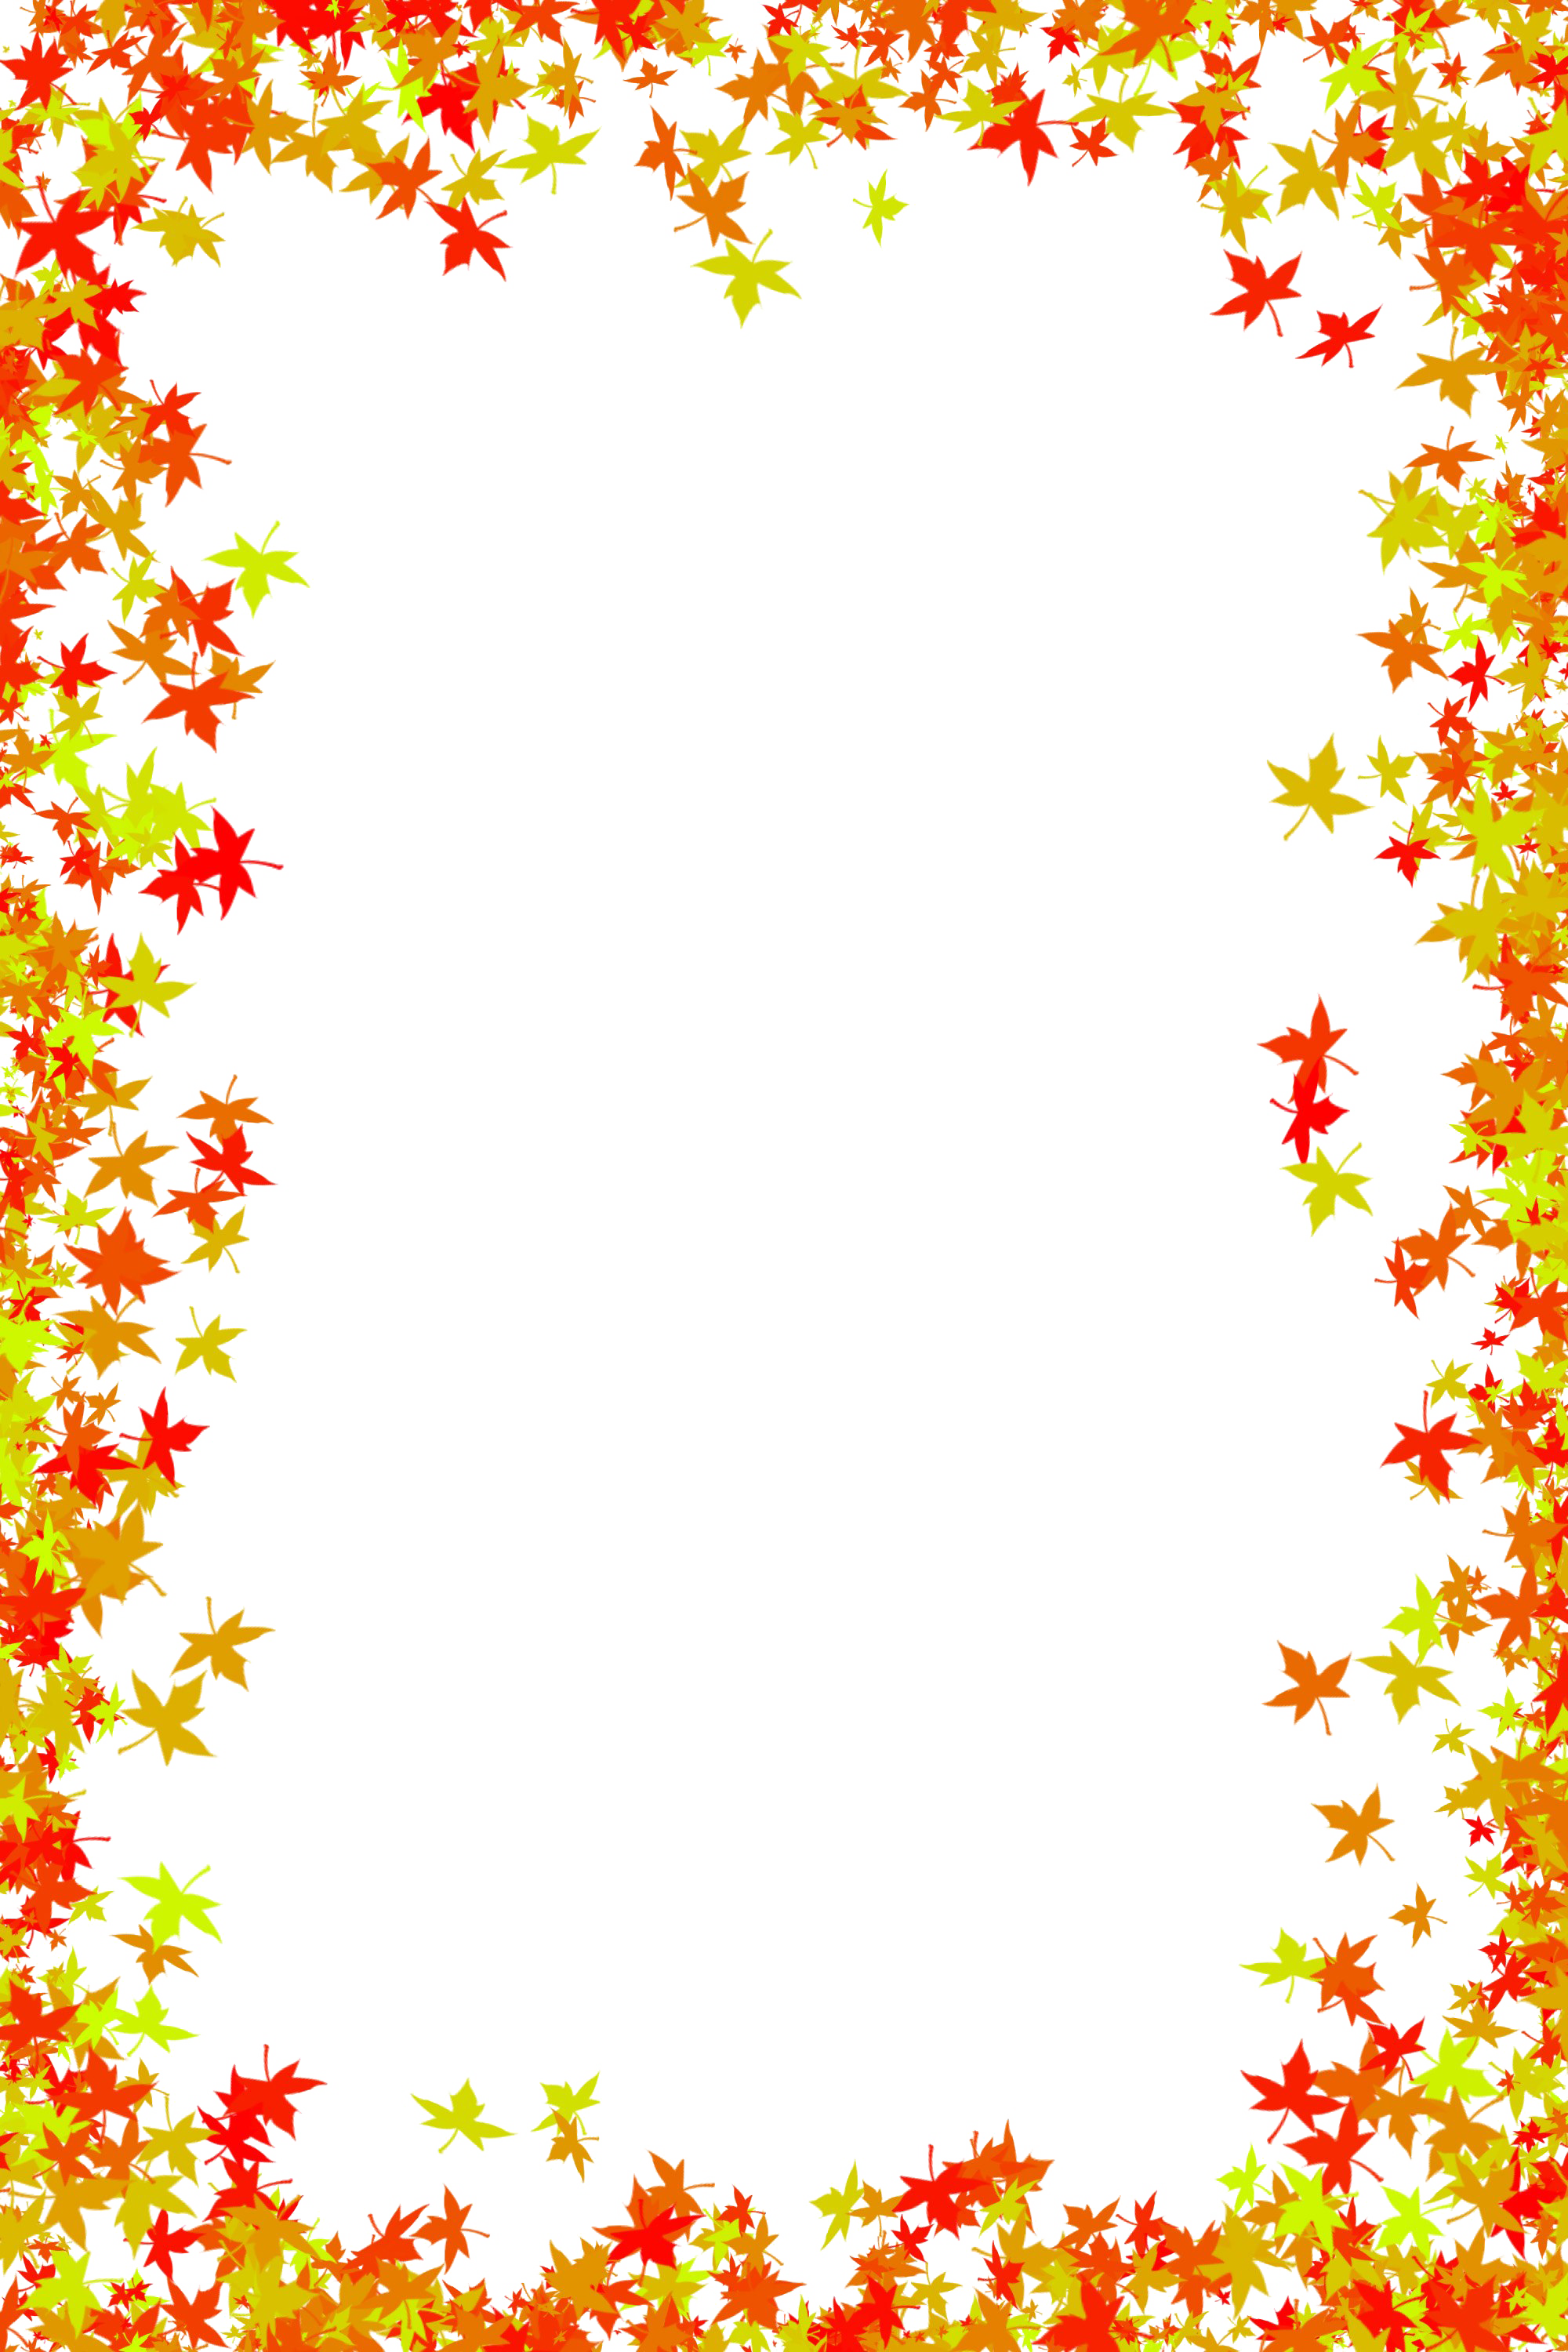 Download PNG image - Fall Border PNG Picture 